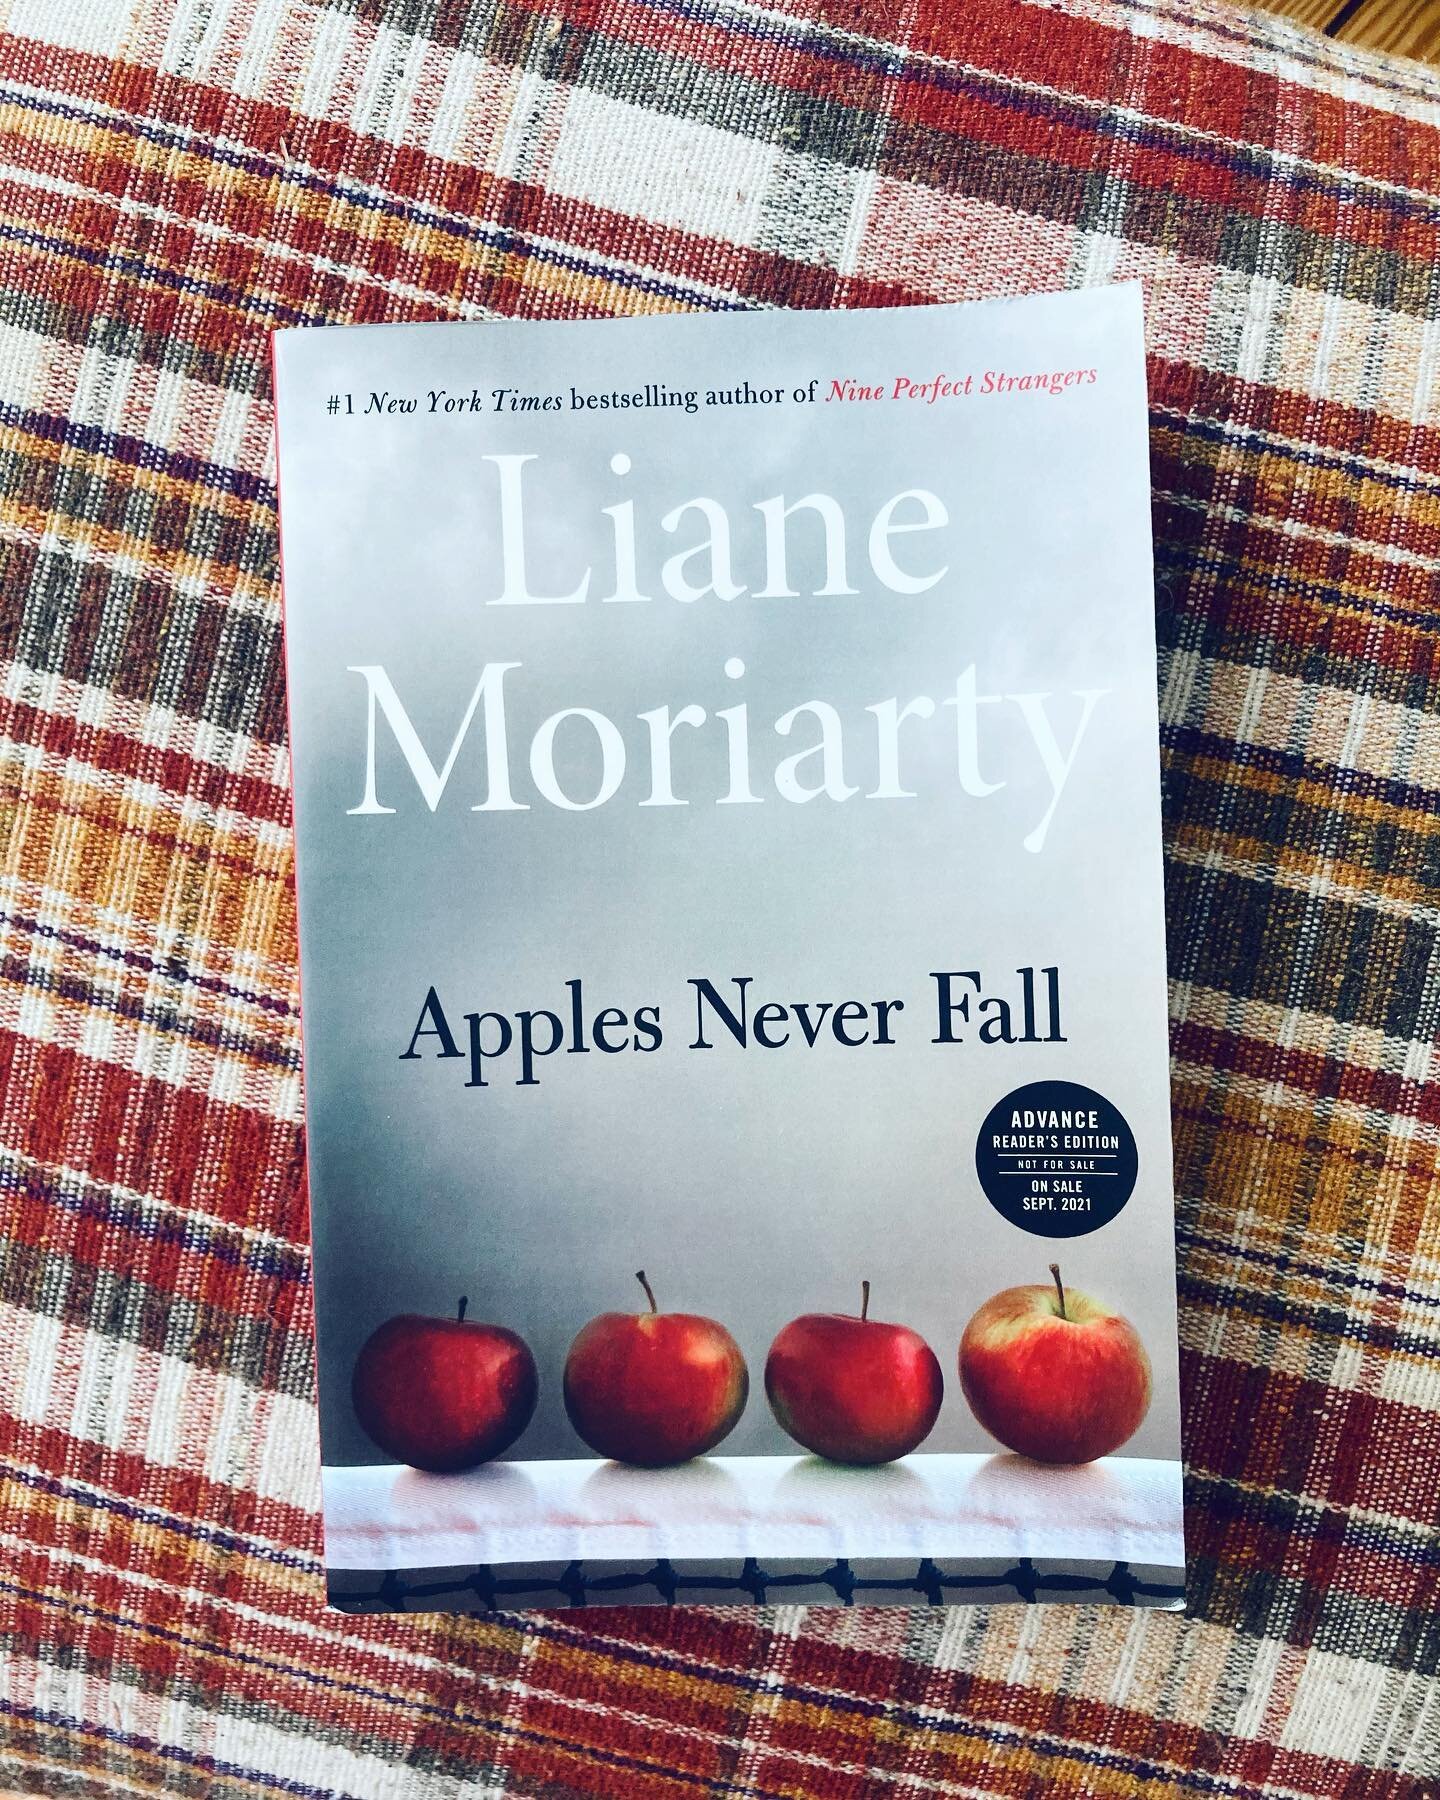 🍎🎉A rave review in from @janeharperauthor for Liane Moriarty&rsquo;s APPLES NEVER FALL: &quot;I loved it. An absolute page-turner with all the wit and nuance that put Liane Moriarty head and shoulders above the crowd. Liane Moriarty shows once agai